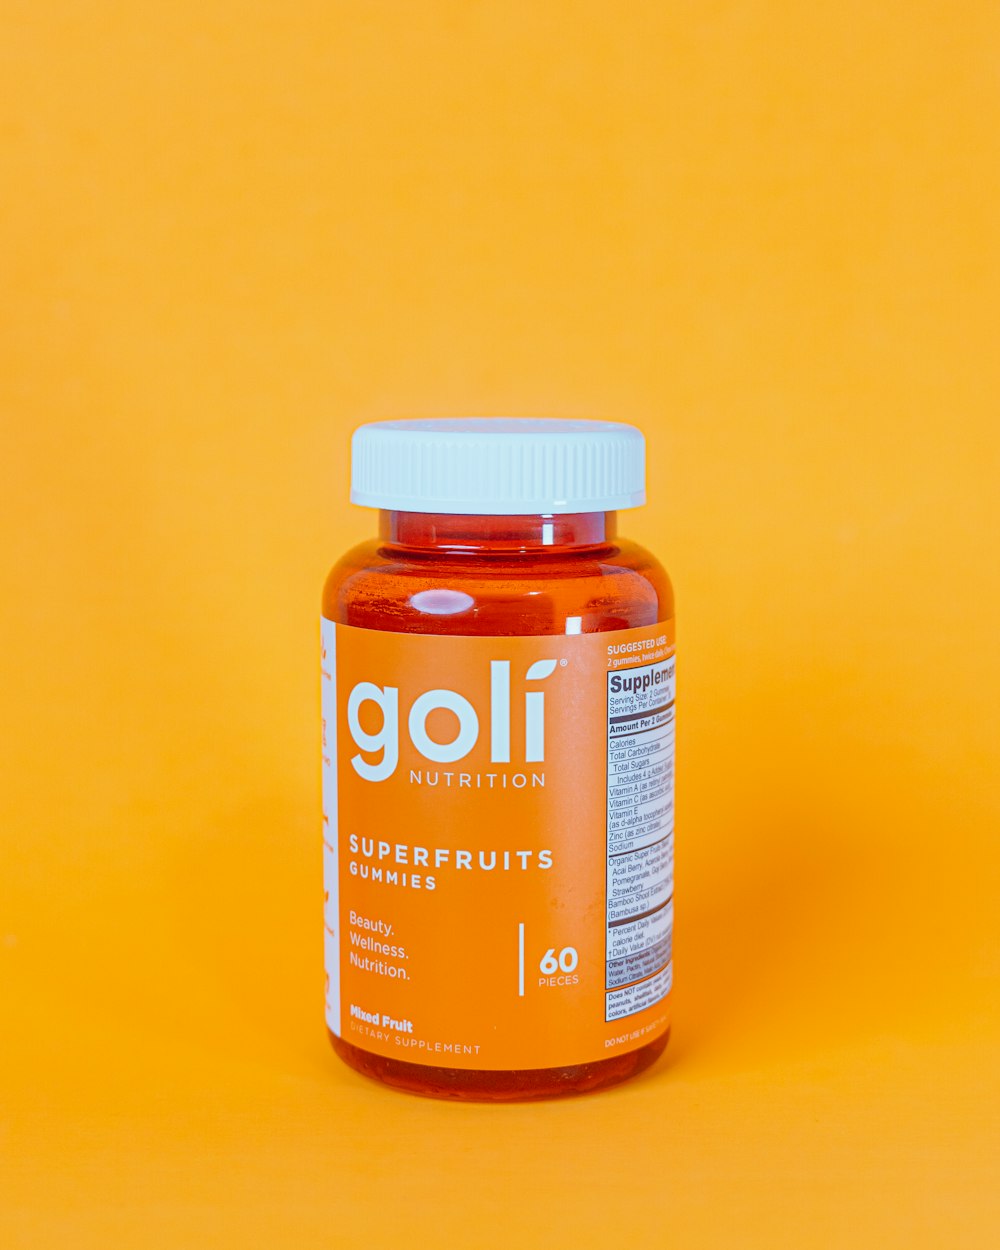 a bottle of golf nutrition superfruits on a yellow background